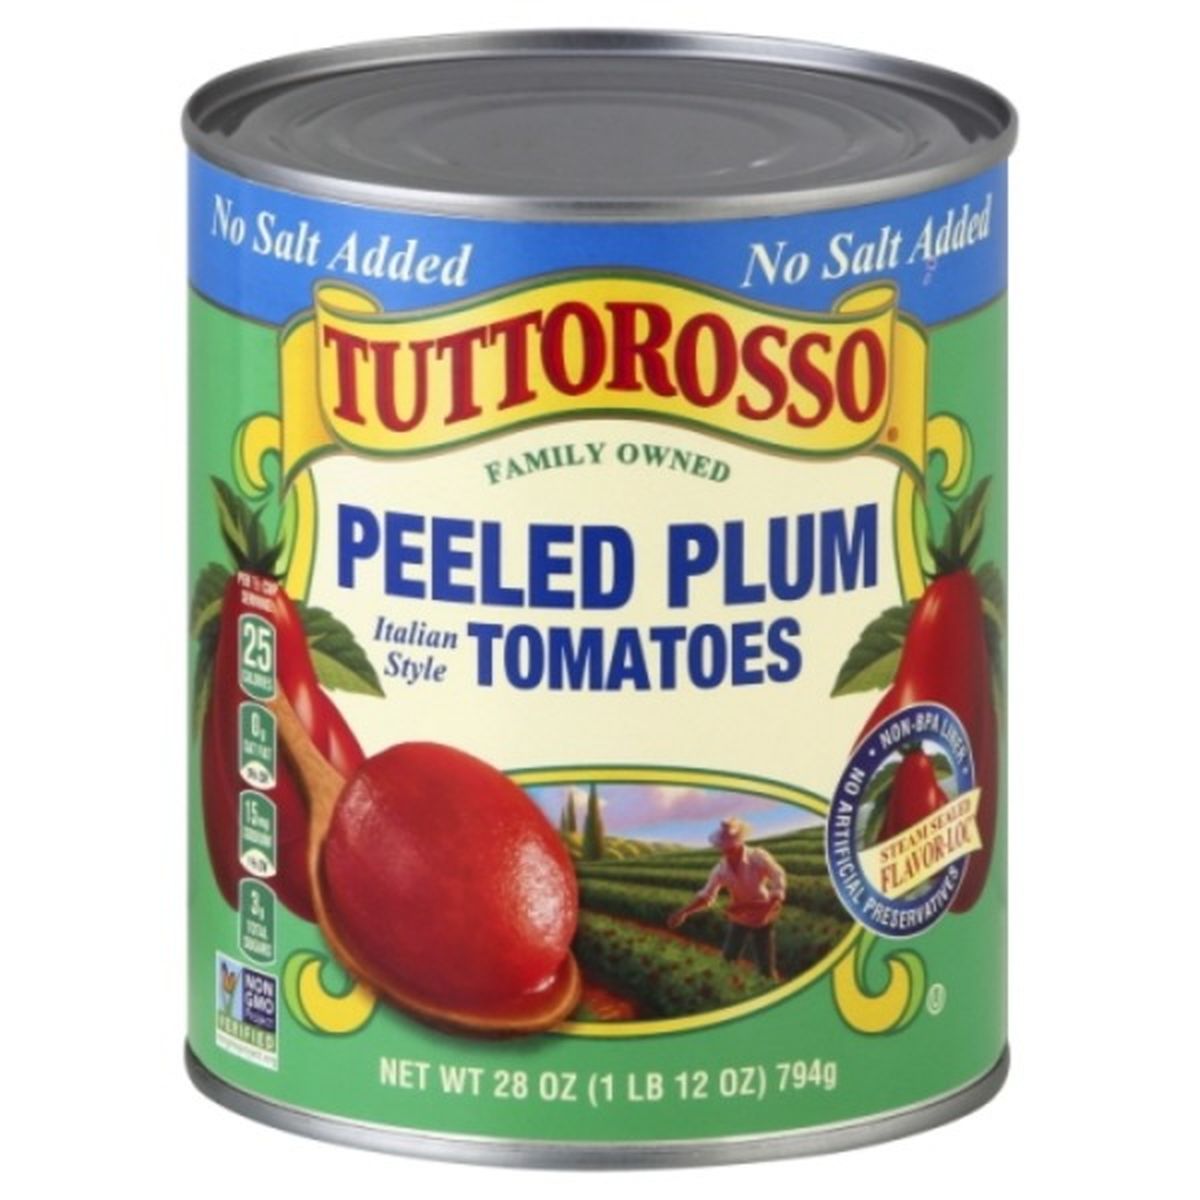 Calories in Tuttorosso Tomatoes Tomatoes, Peeled Plum, No Salt Added, Italian Style